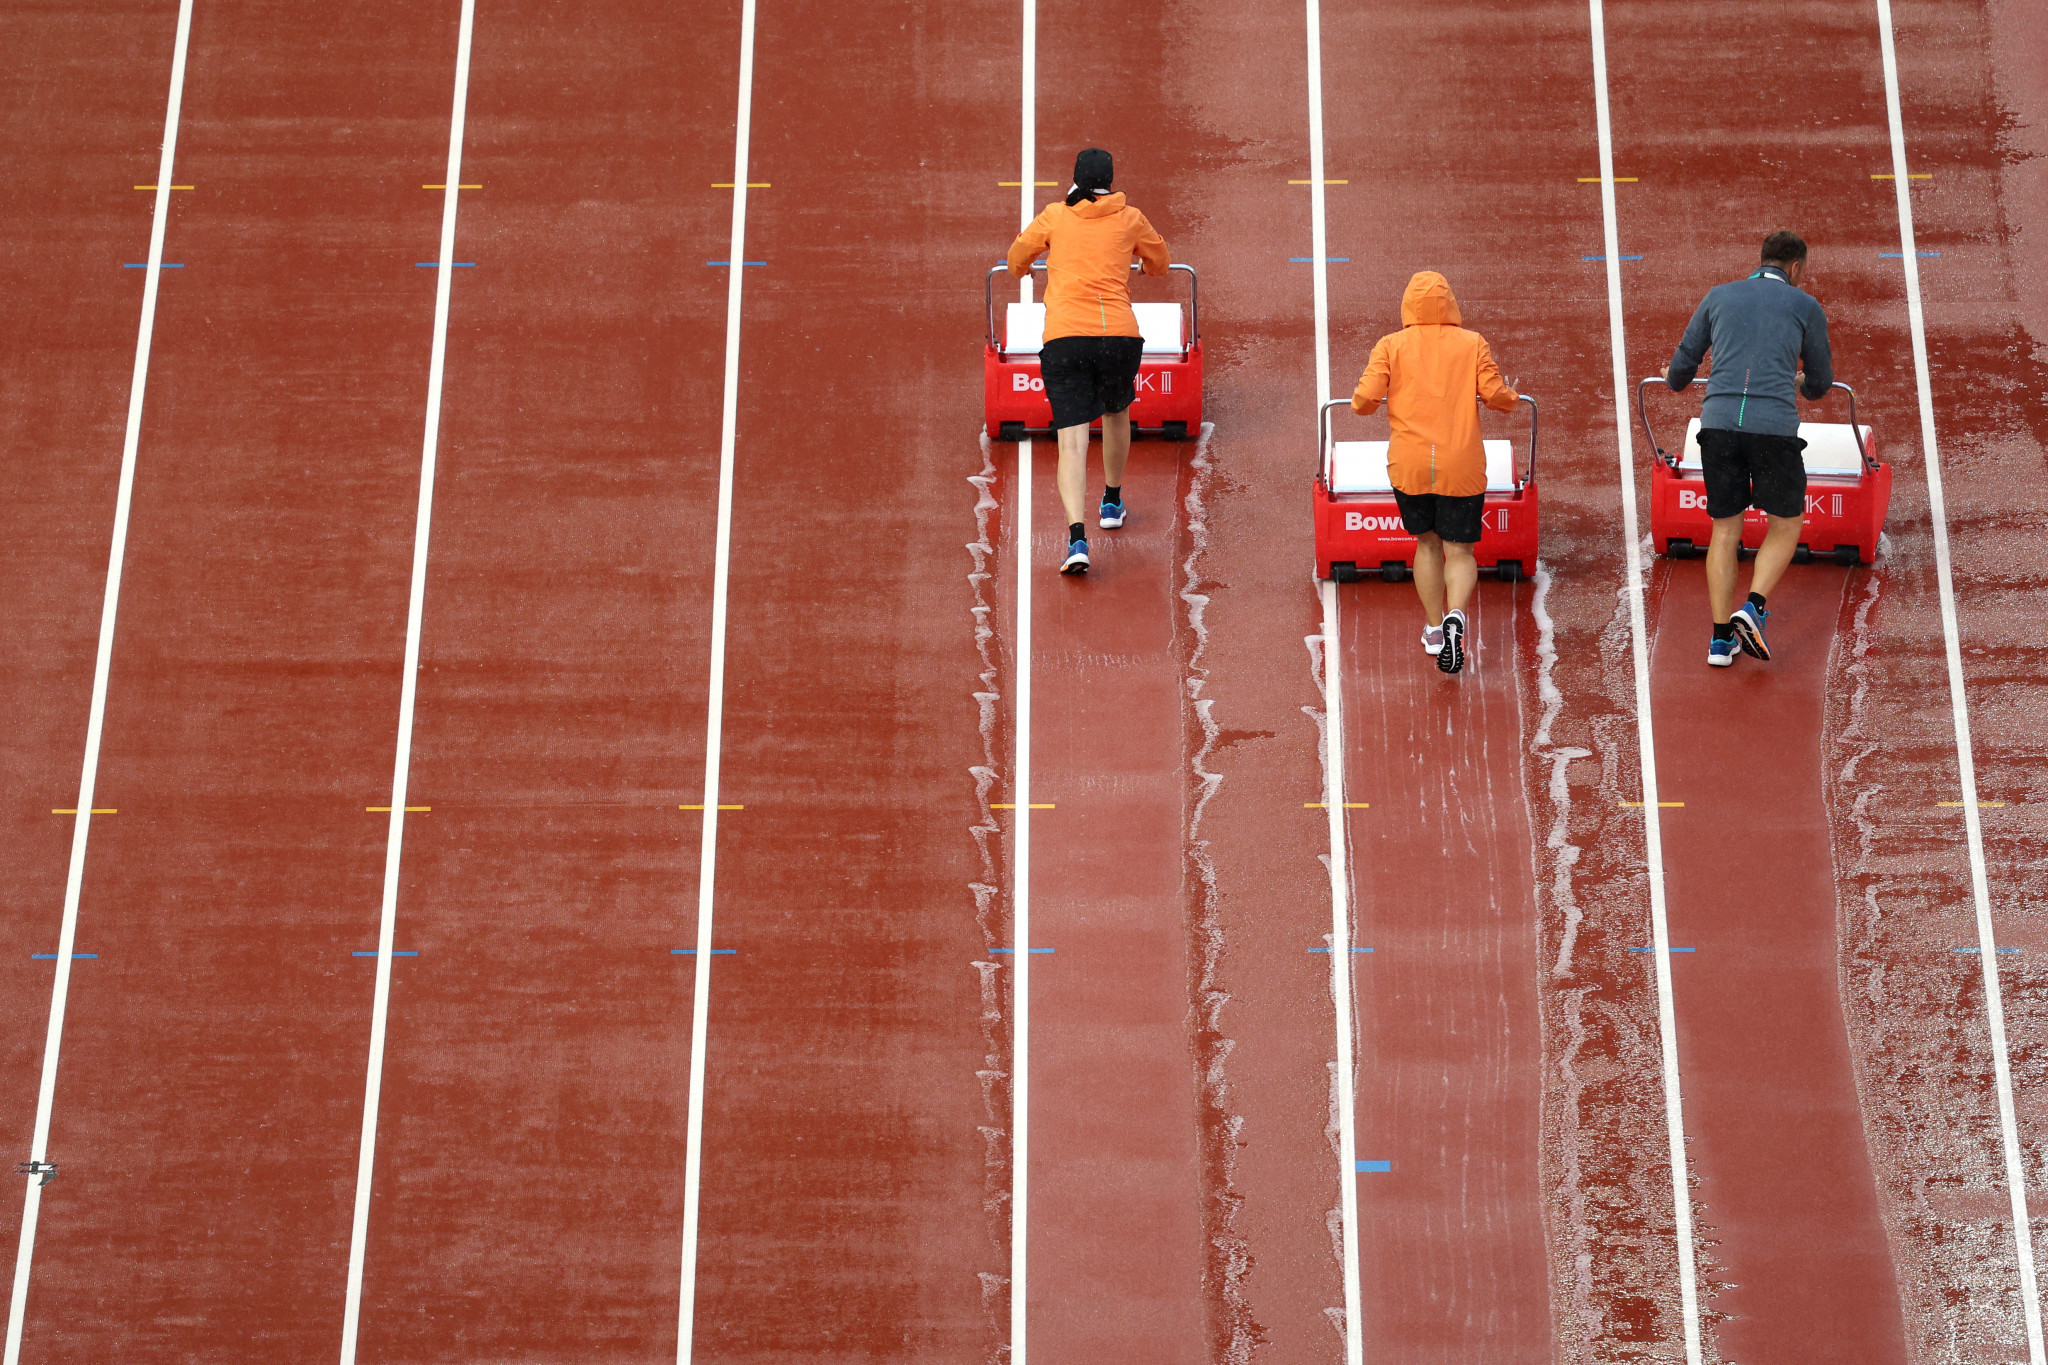 Torrential rain also led to the start of competition at the National Athletics Centre being delayed by an hour ©Getty Images